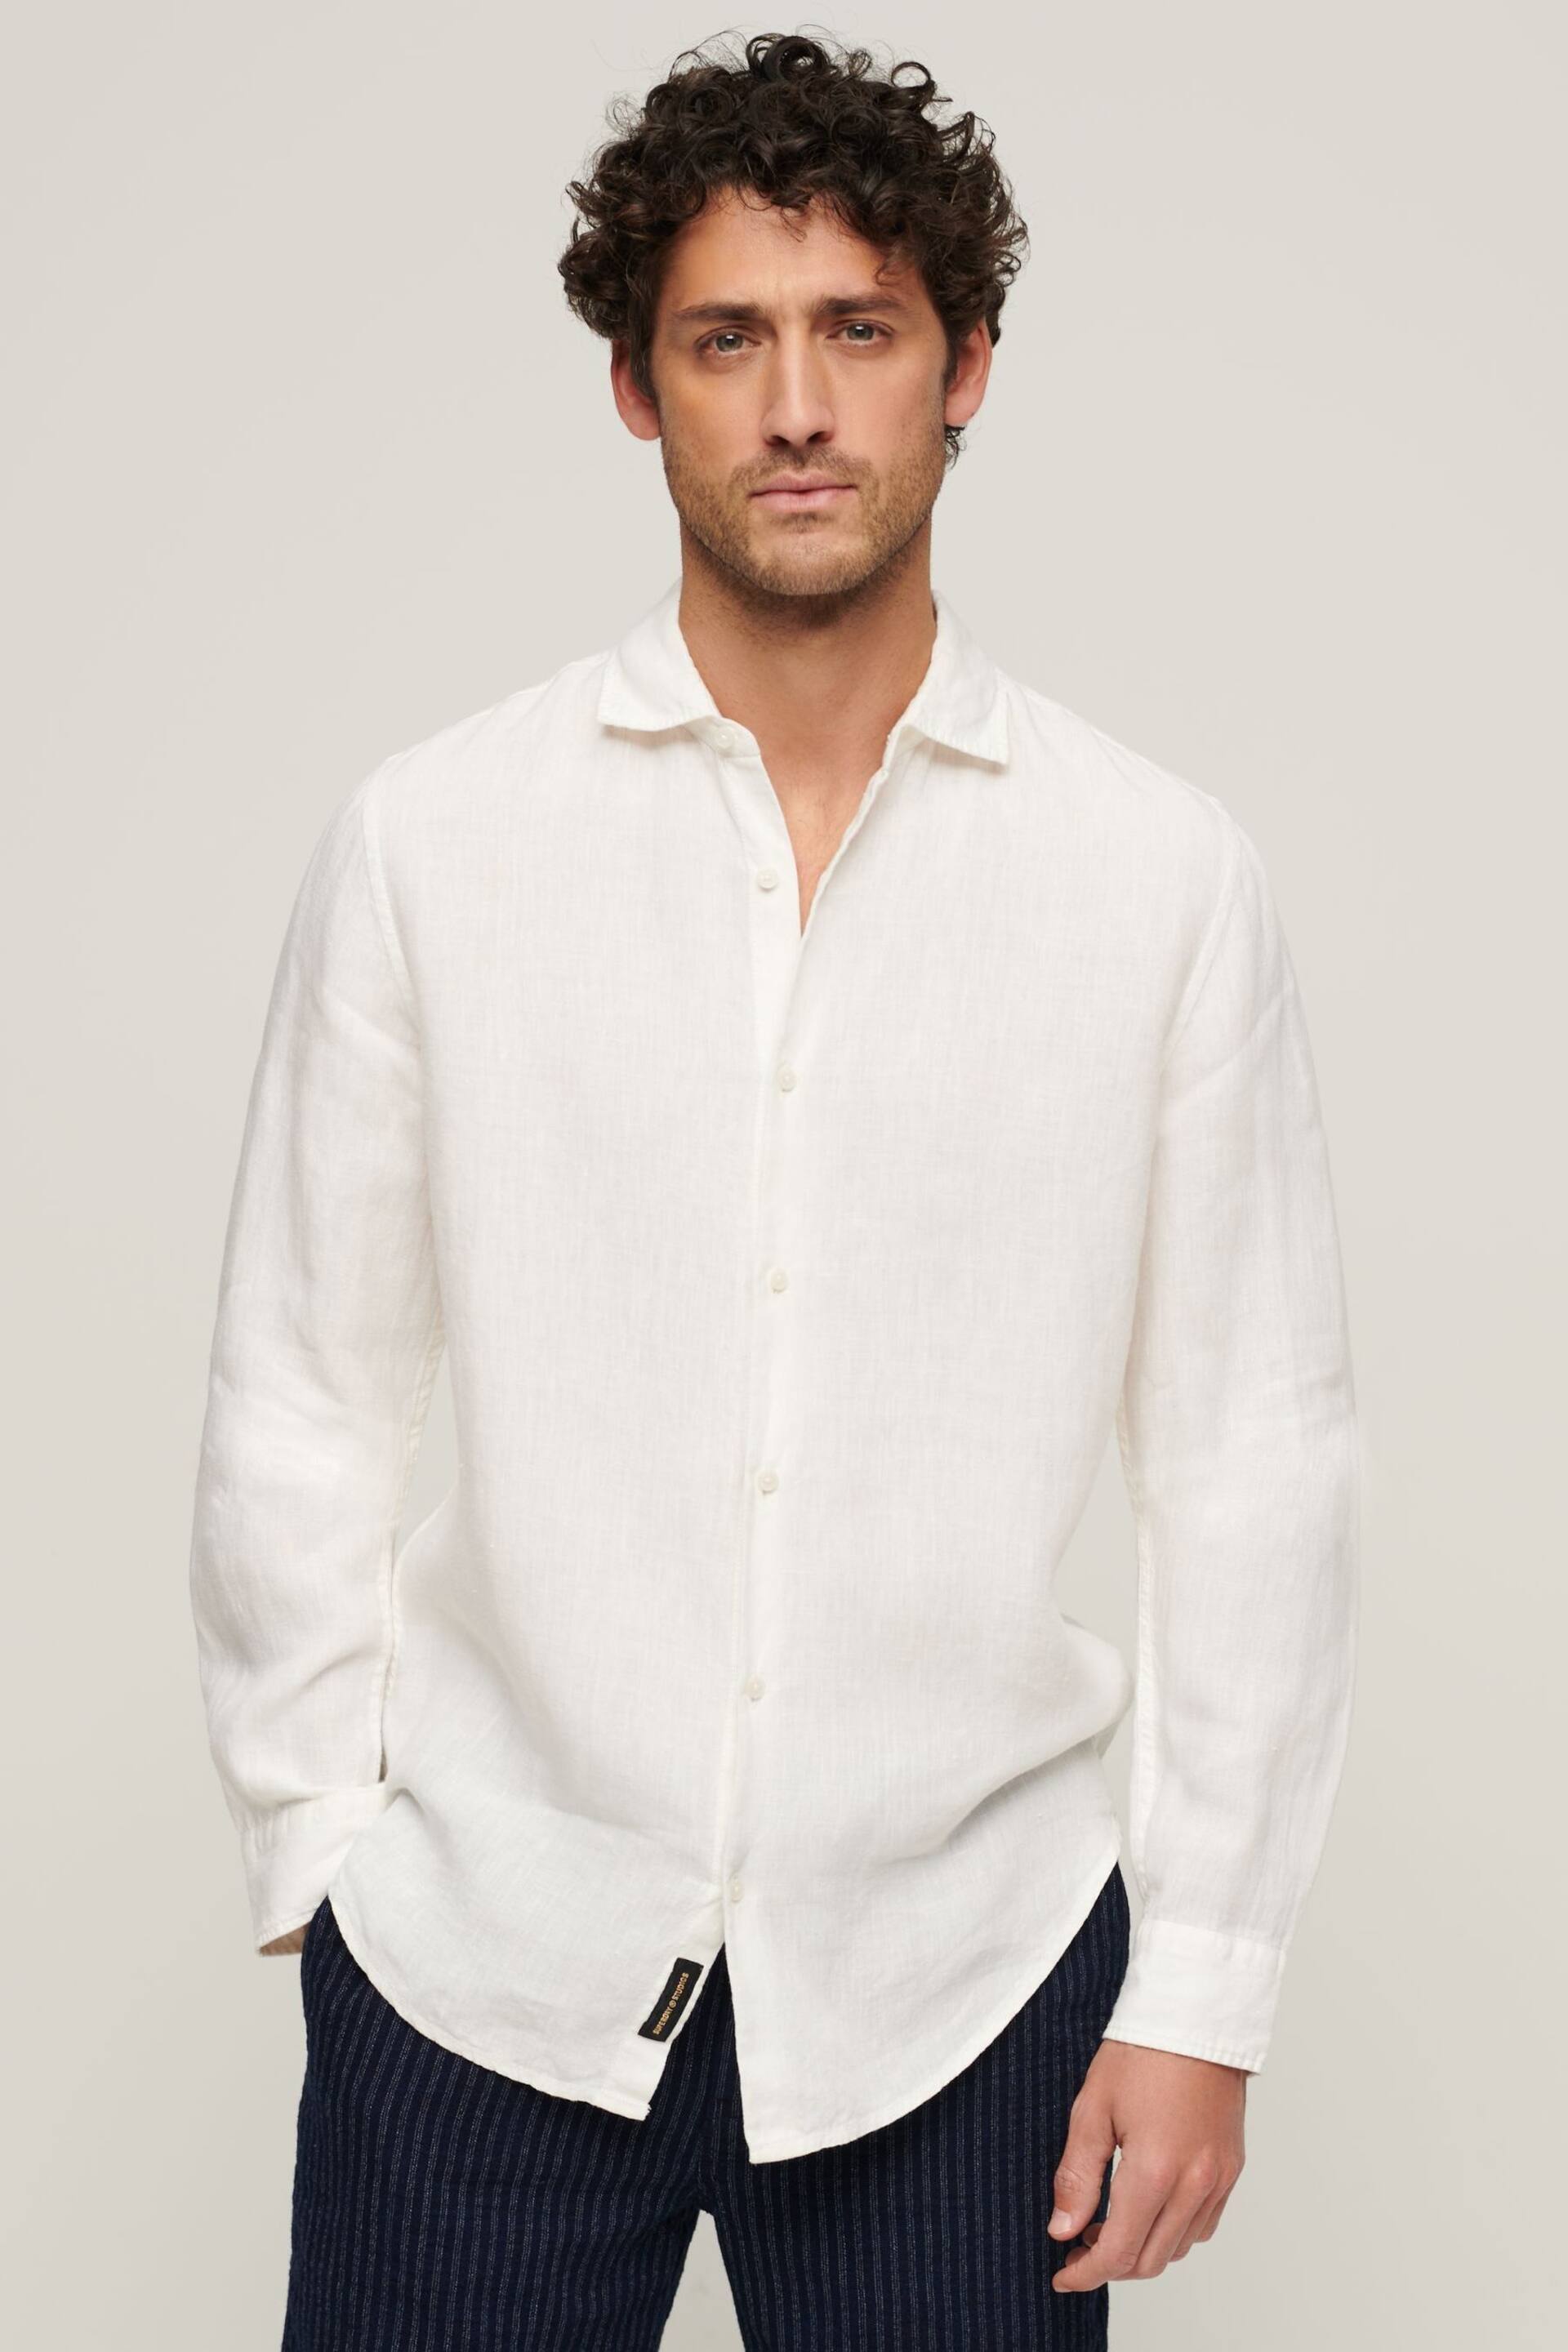 Superdry Optic Studios Casual Linen Long Sleeved Shirt - Image 1 of 7